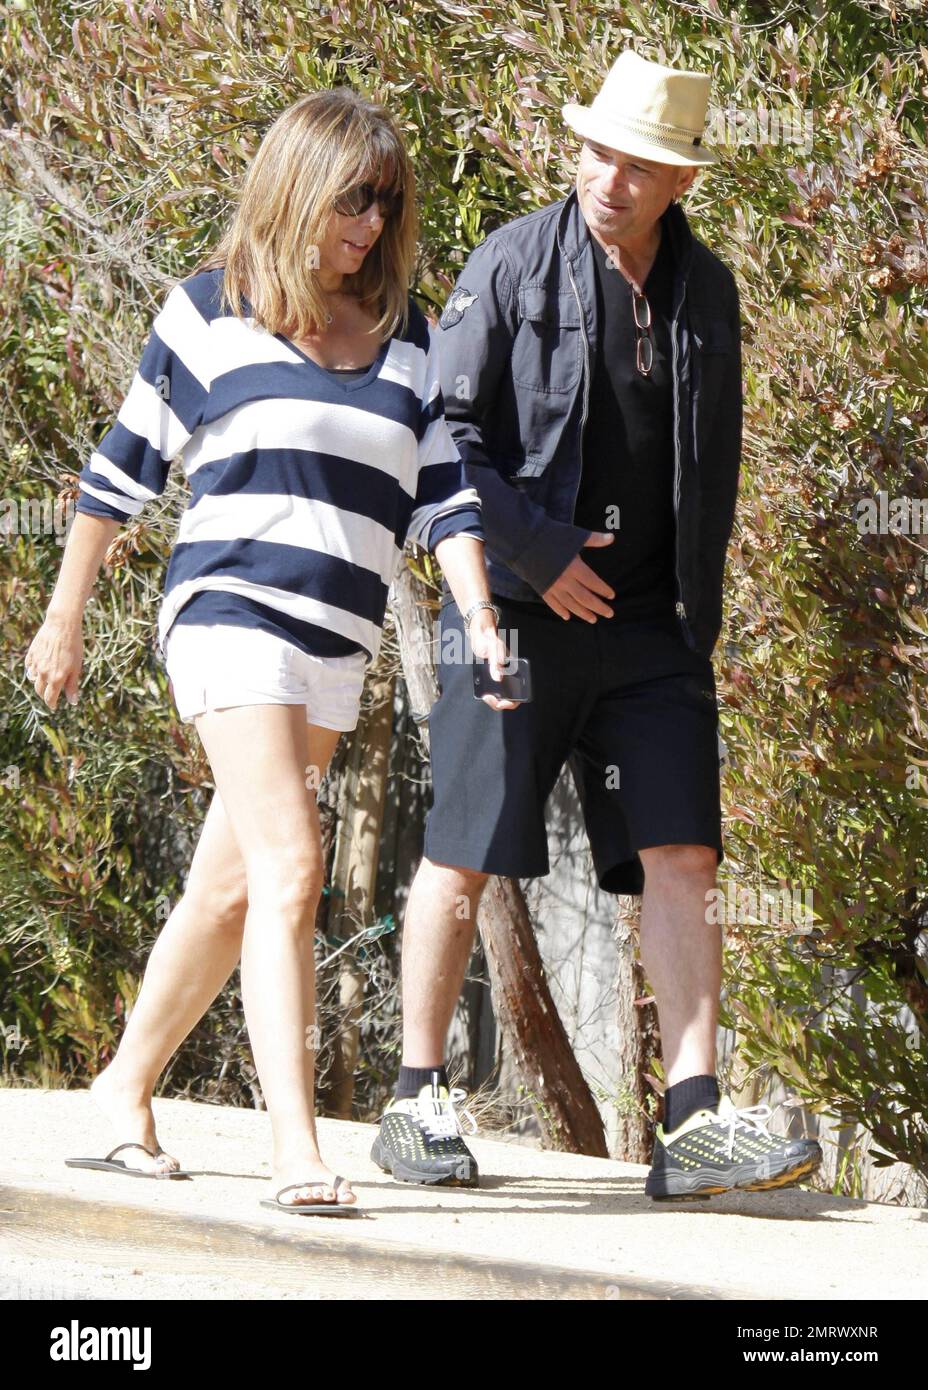 'Deal or No Deal' host Howie Mandel enjoys Labor Day Weekend by taking a stroll with his wife Terry Soil around his Malibu neighborhood. Malibu, CA. 4th September 2011.    . Stock Photo